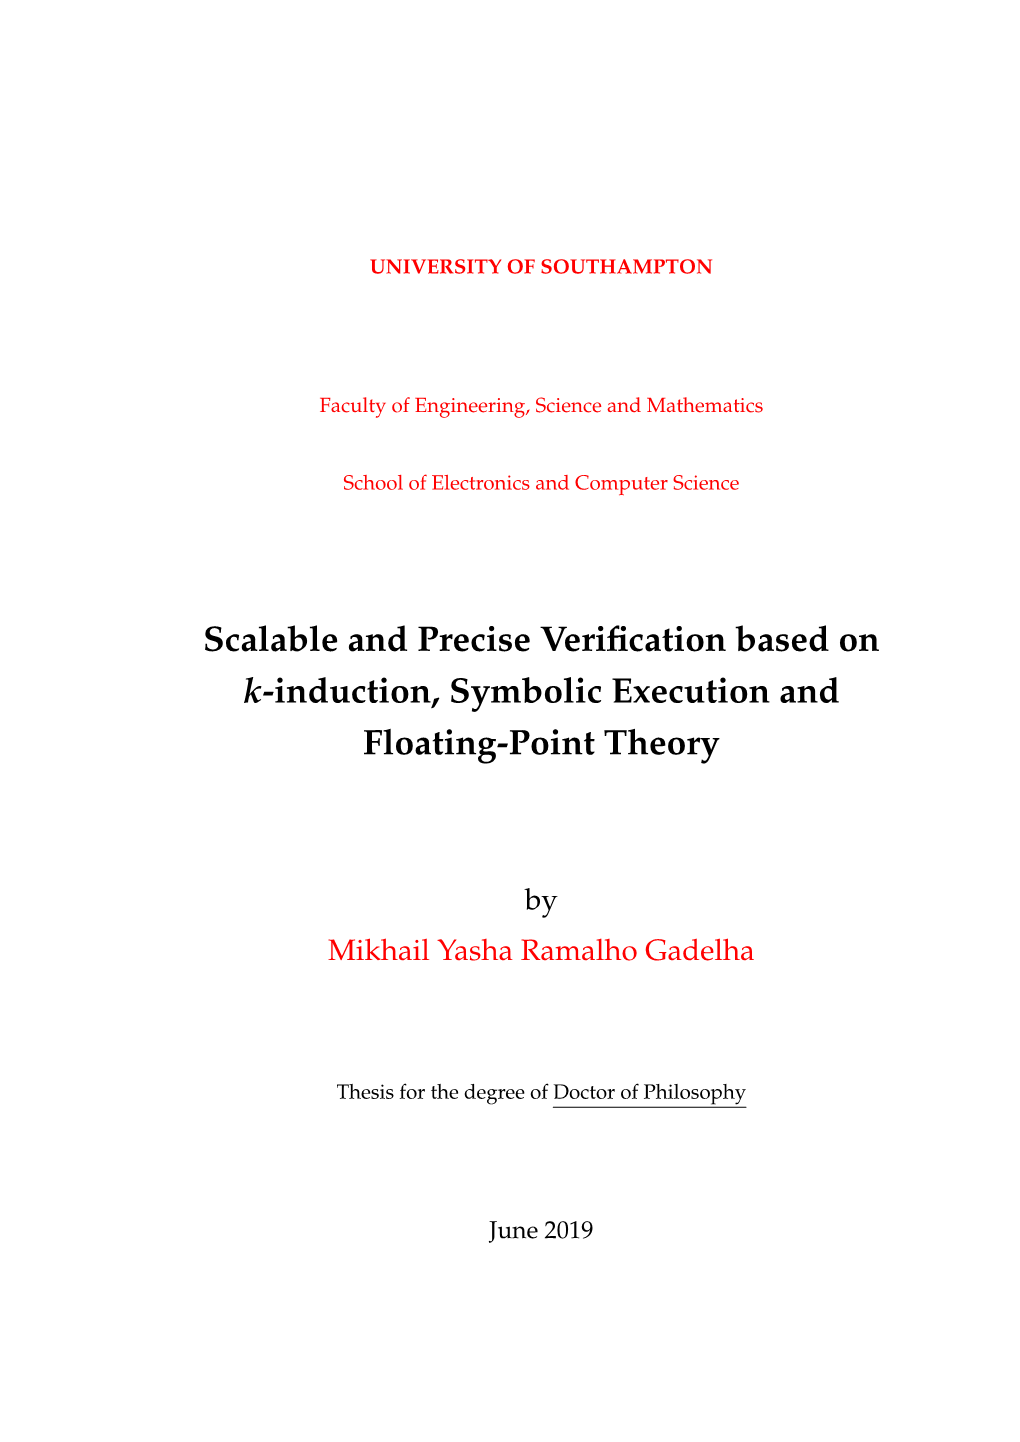 Scalable and Precise Verification Based on K-Induction, Symbolic